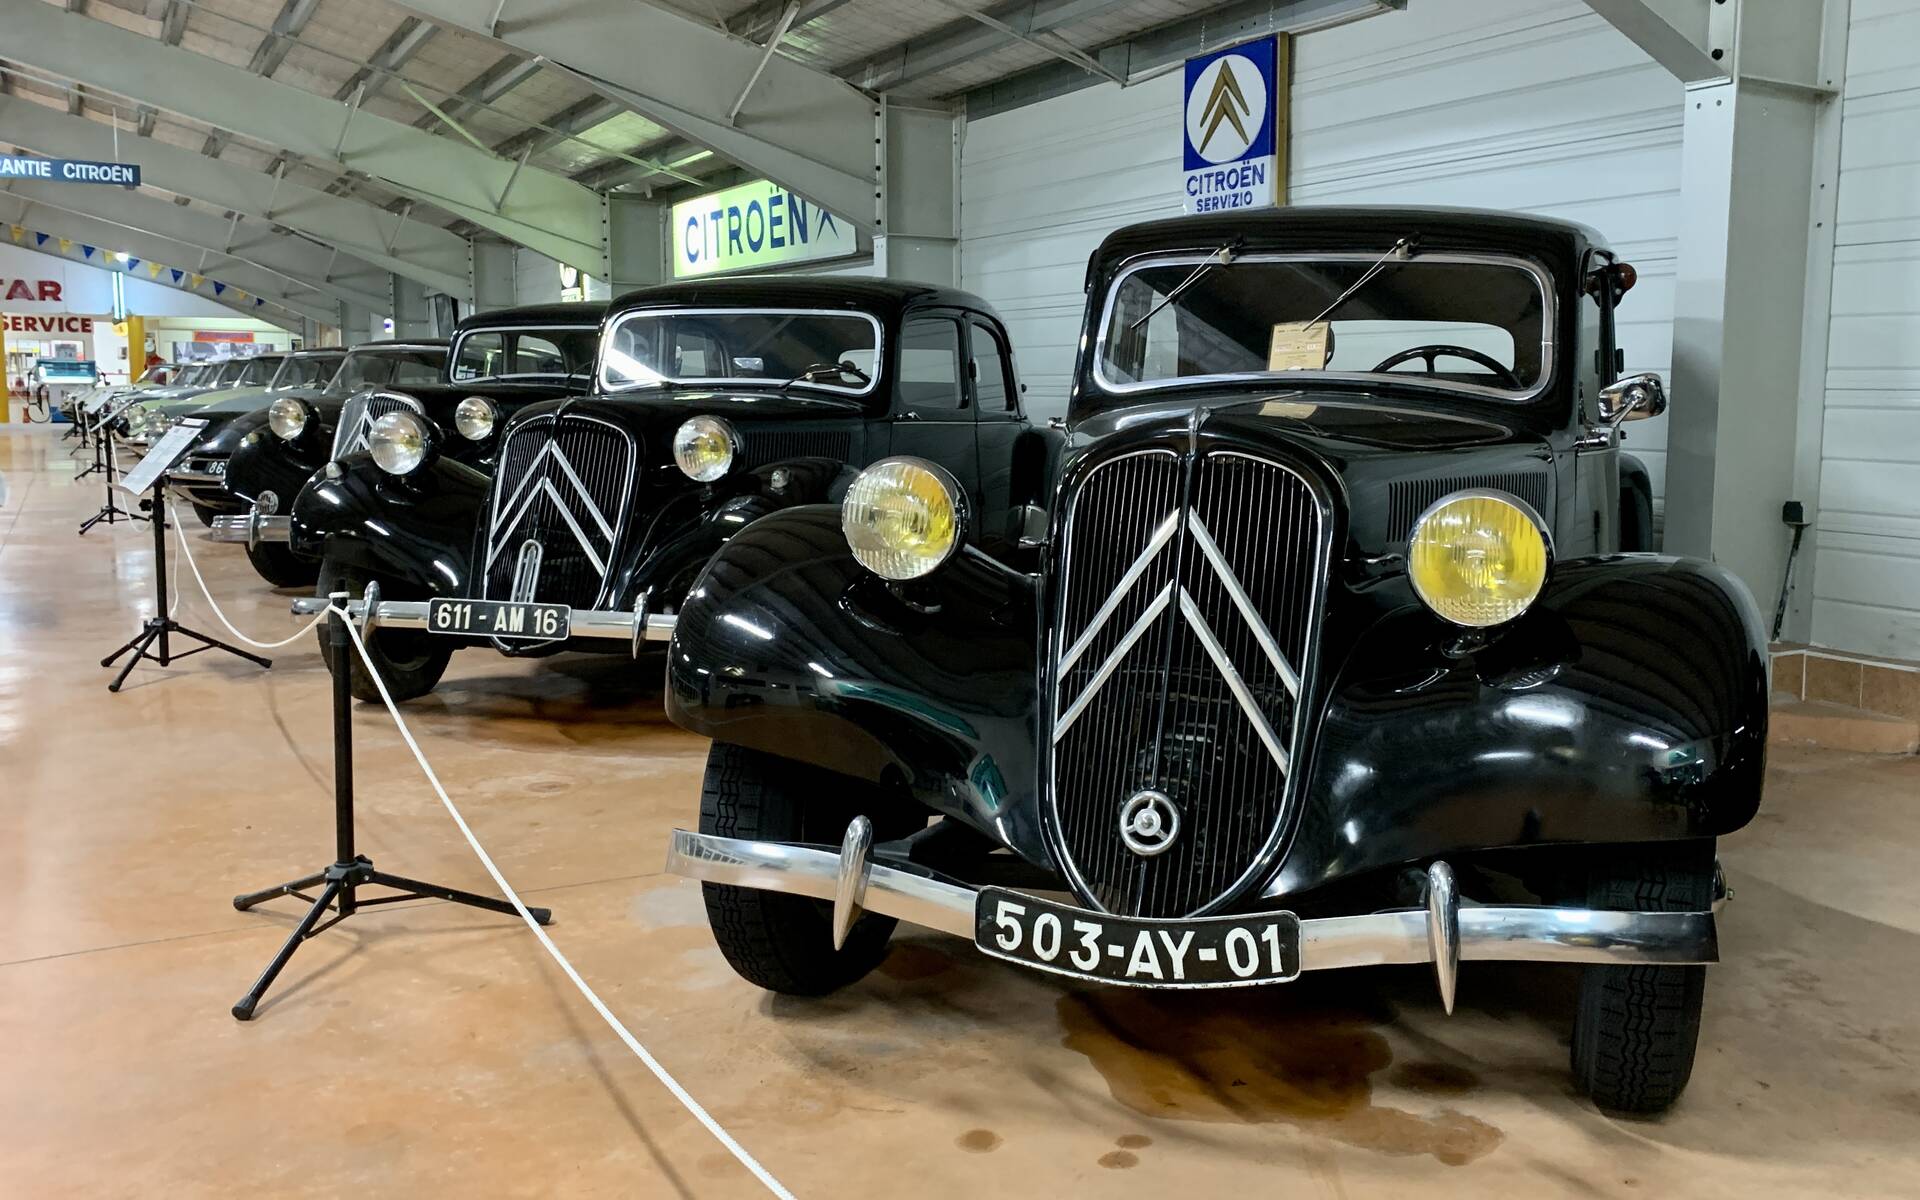 <p><strong>Citroën Traction</strong></p>